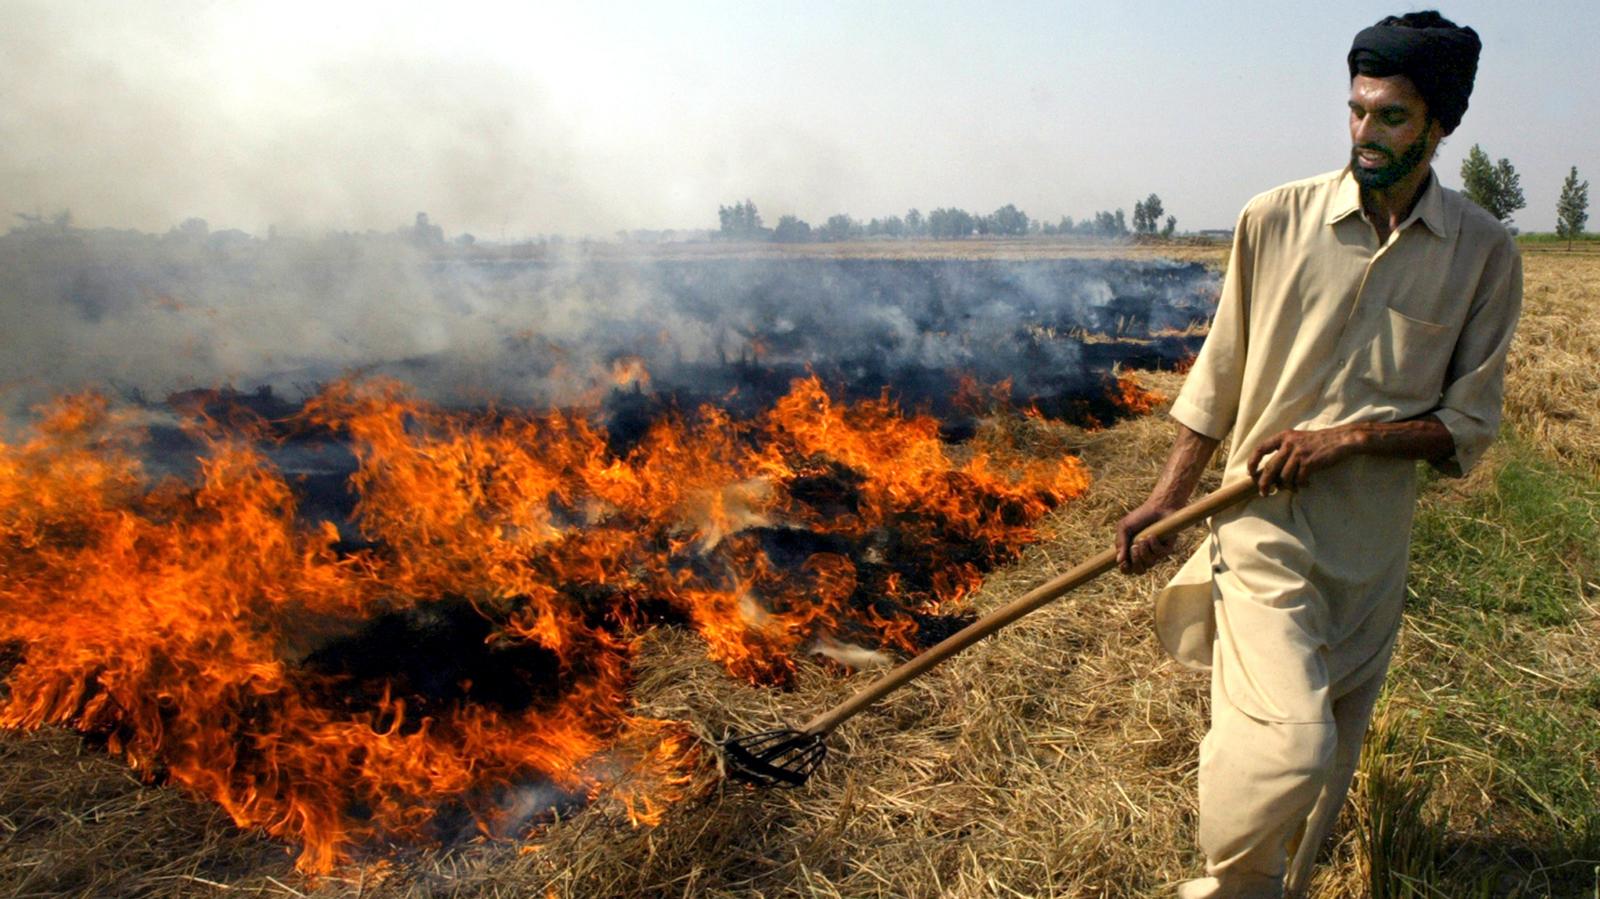 After stringent ban on farm fires, the practice goes unabated in broad daylight 